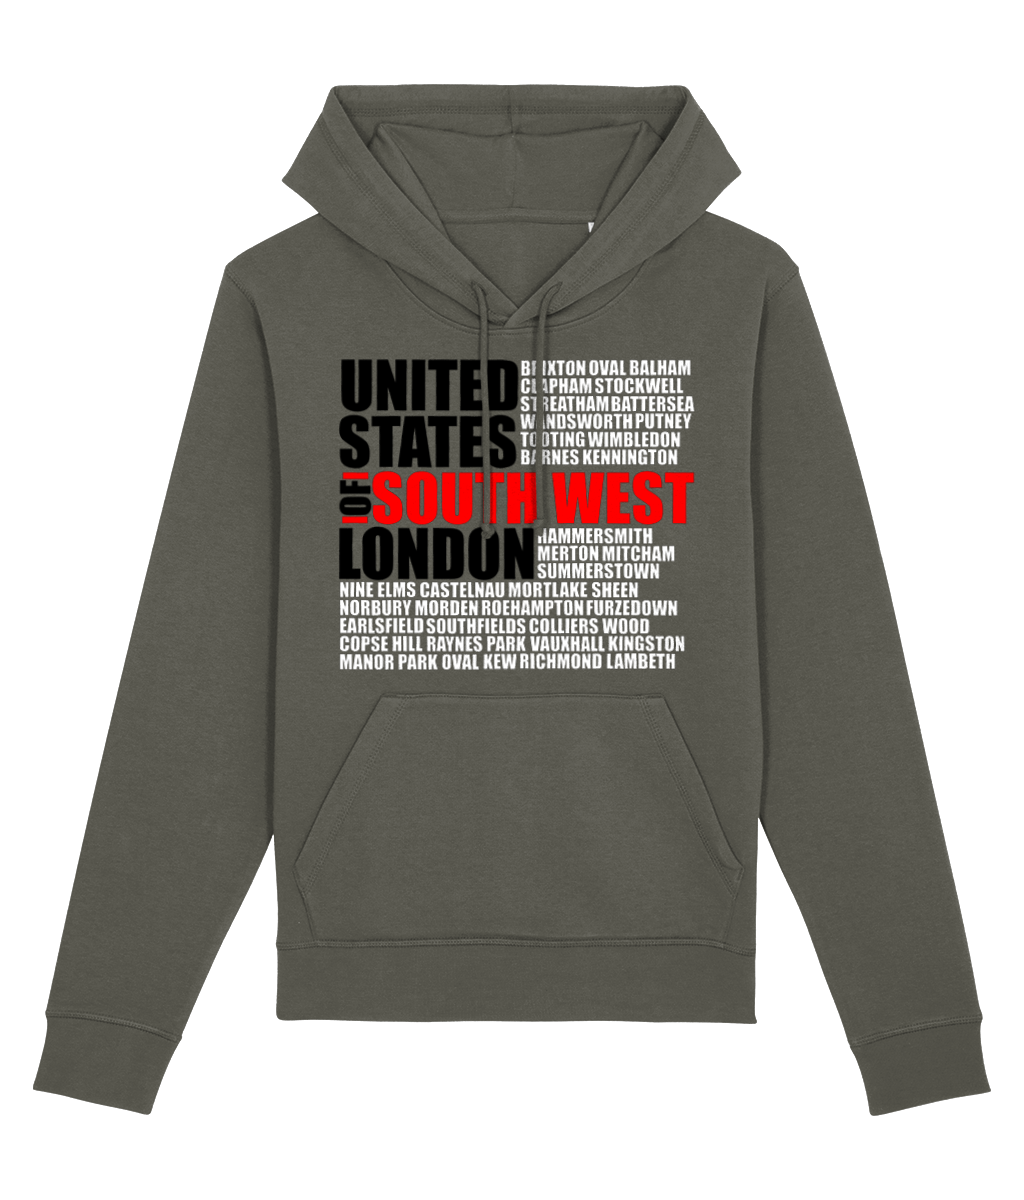 United States of South West London Hoodie